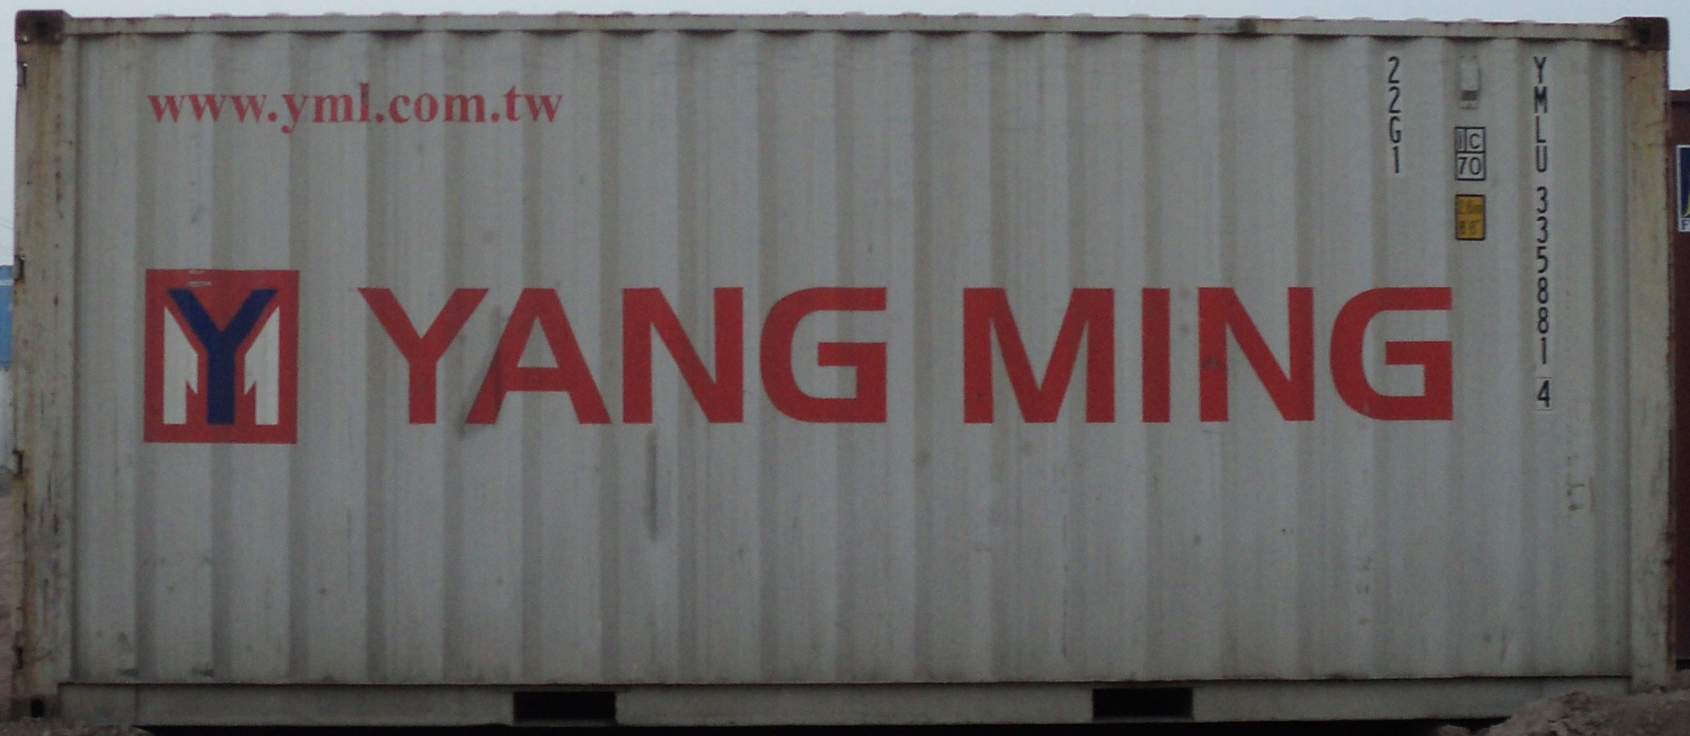 20DC YMLU container picture